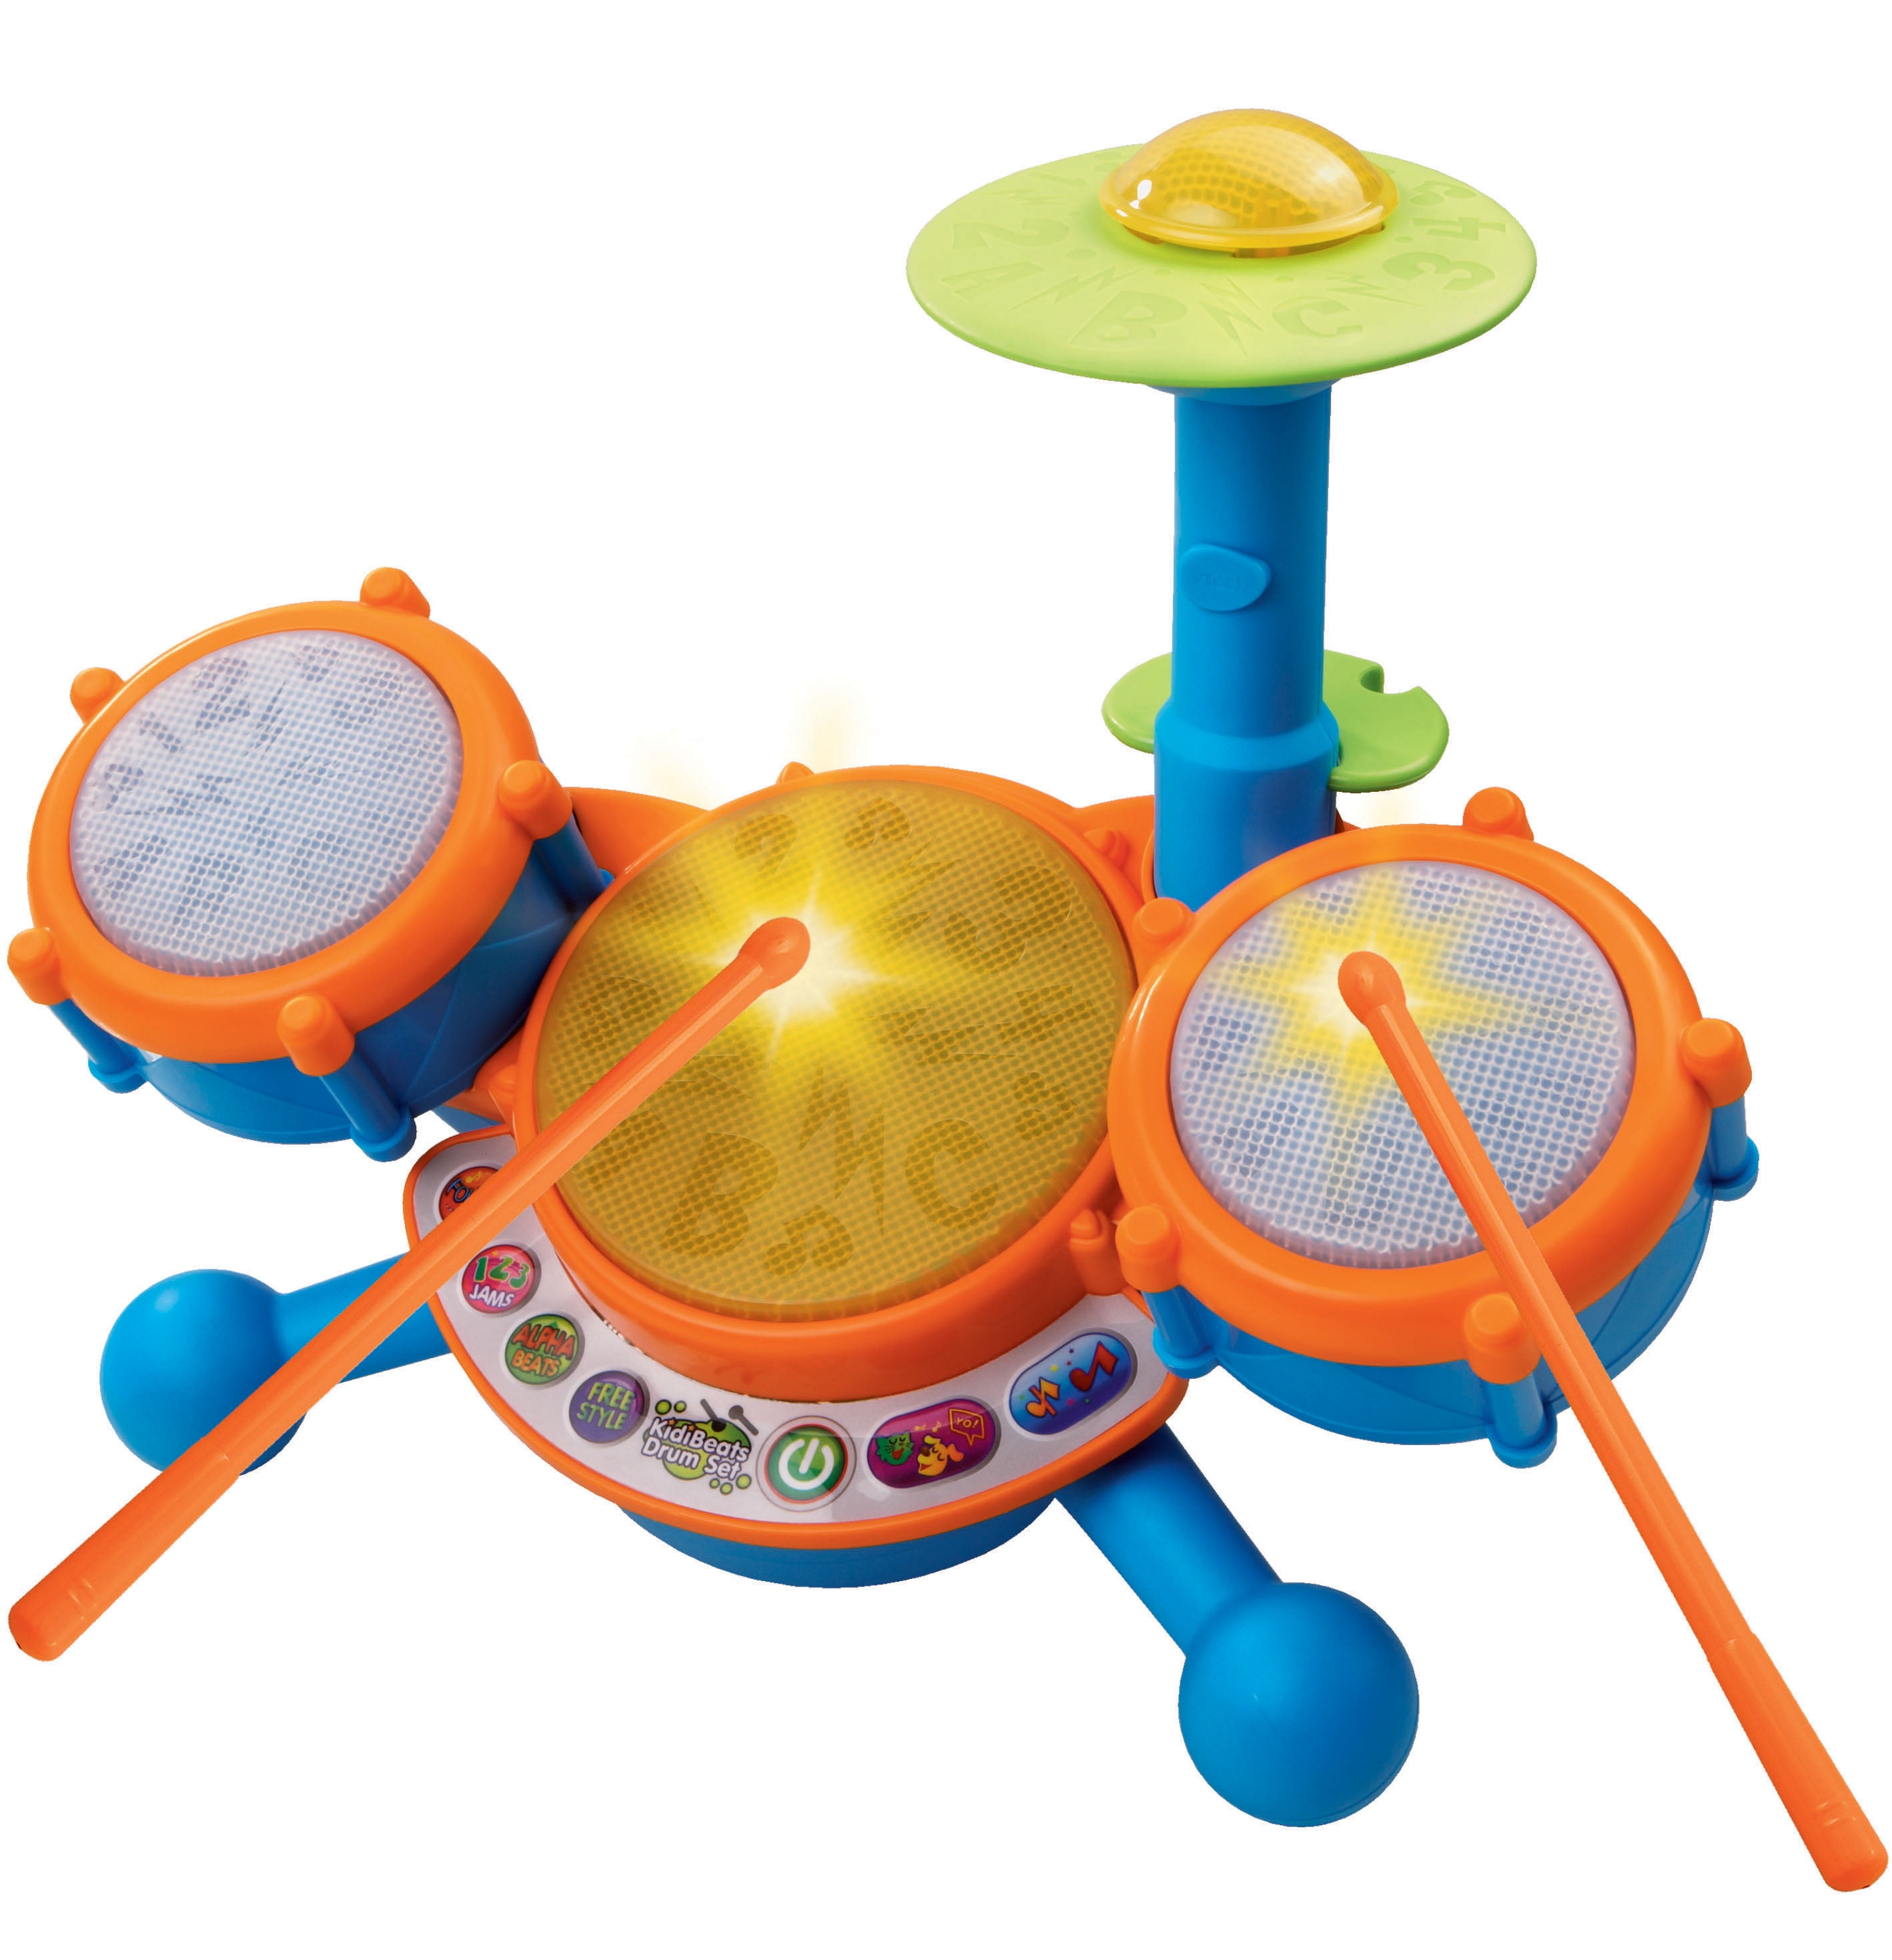 Children's Fun Musical Instrument Toy Set Wooden Percussion Kids Play Toy Gift 